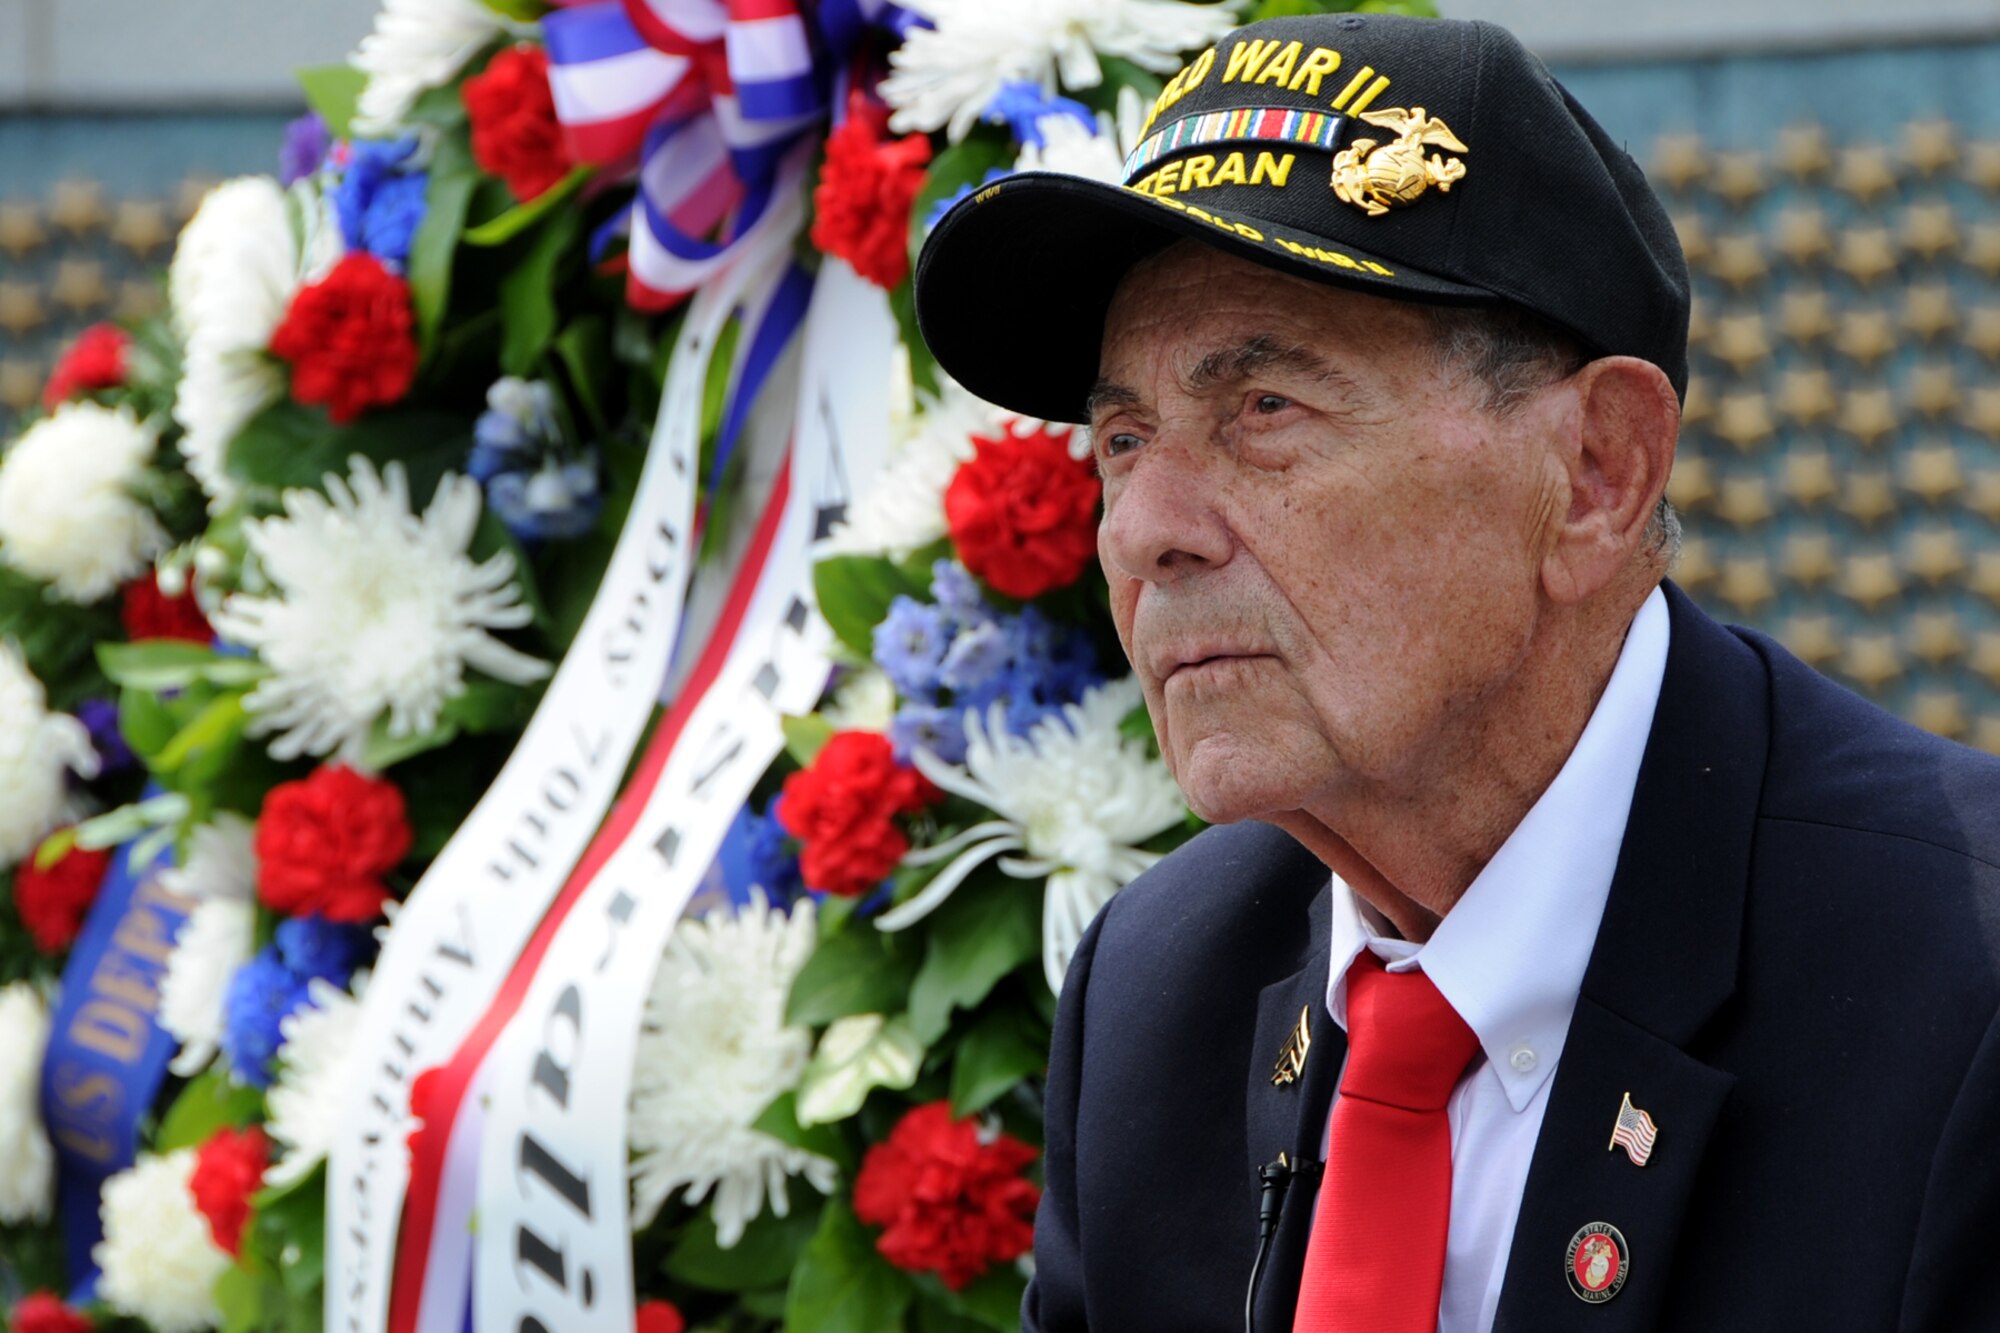 Former U.S. Marine Corps Sgt. Ernie Yamartino joins other World War II
veterans from the Chicago area during a Wreath Ceremony at the National
World War II Memorial on Sep. 2. The event was hosted by Honor Flight
Chicago in honor of World War II veterans from the Chicago area. Honor
Flight Chicago was founded to recognize World War II veterans by flying them
free-of-charge to Washington D.C. for a day of honor, remembrance and
celebration.  (U.S. Air Force photo/Staff Sgt. Matt Davis)

